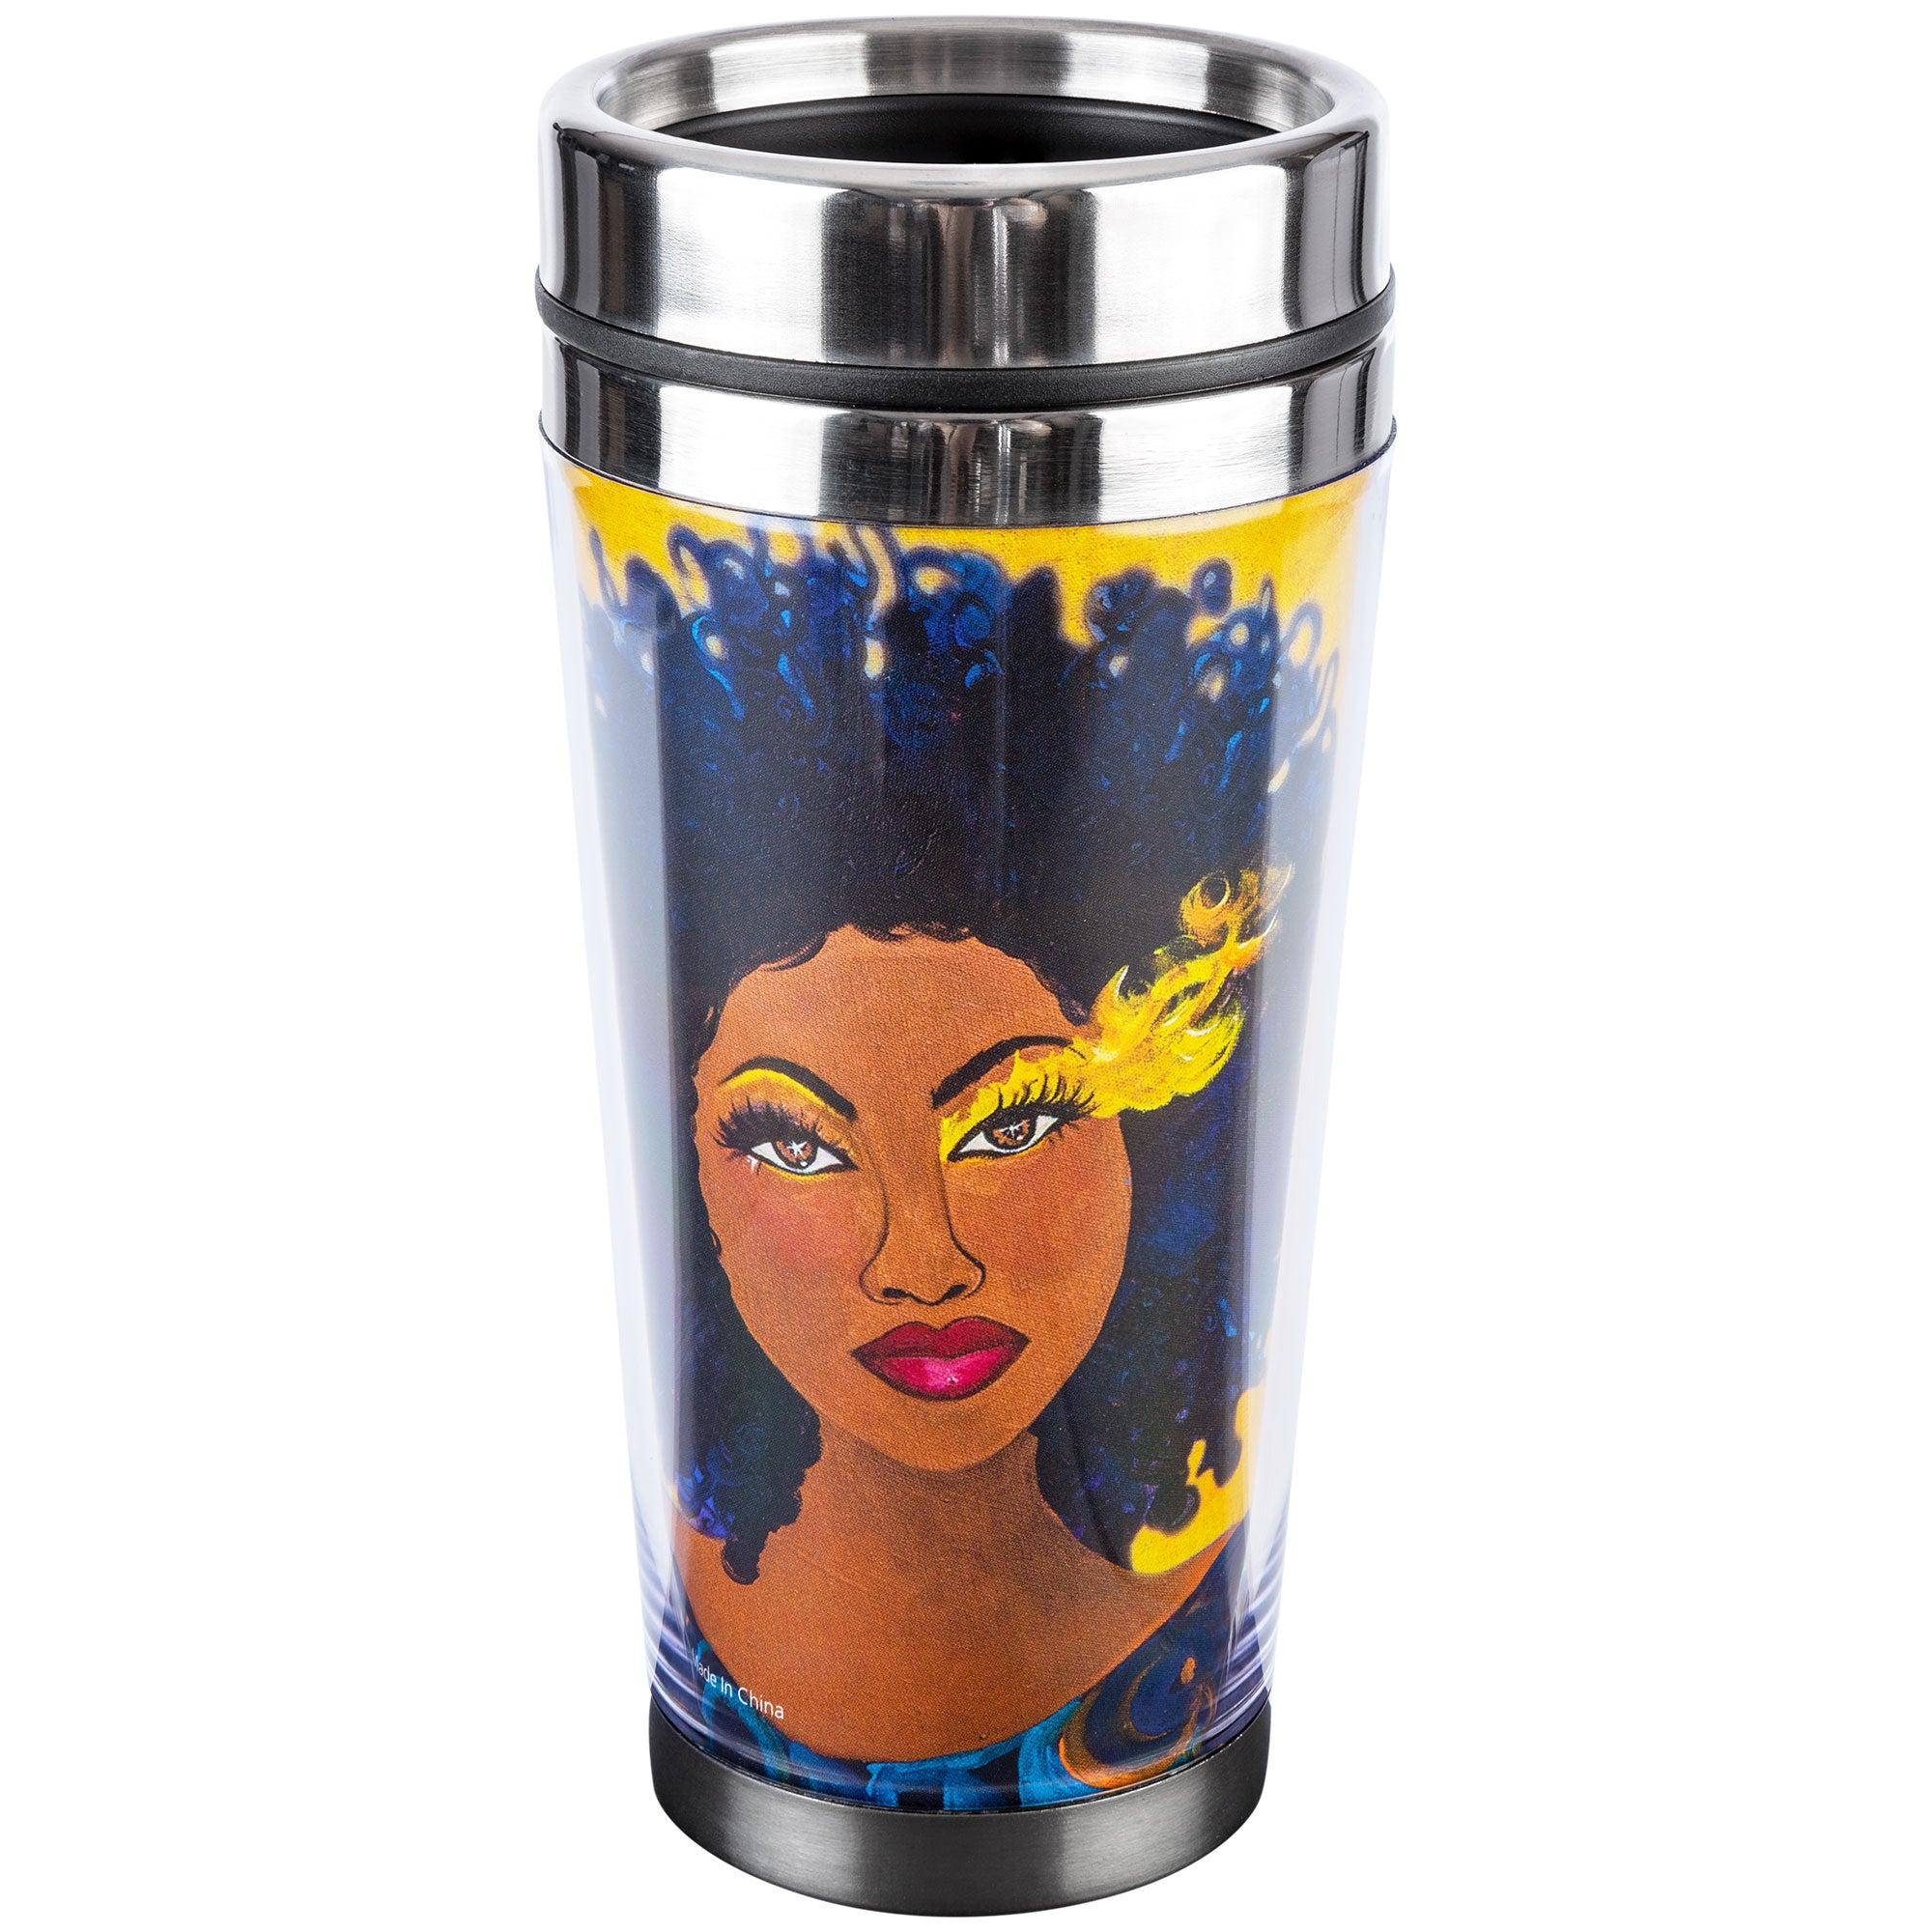 Shades Of Color Travel Mug - Soul On Fire